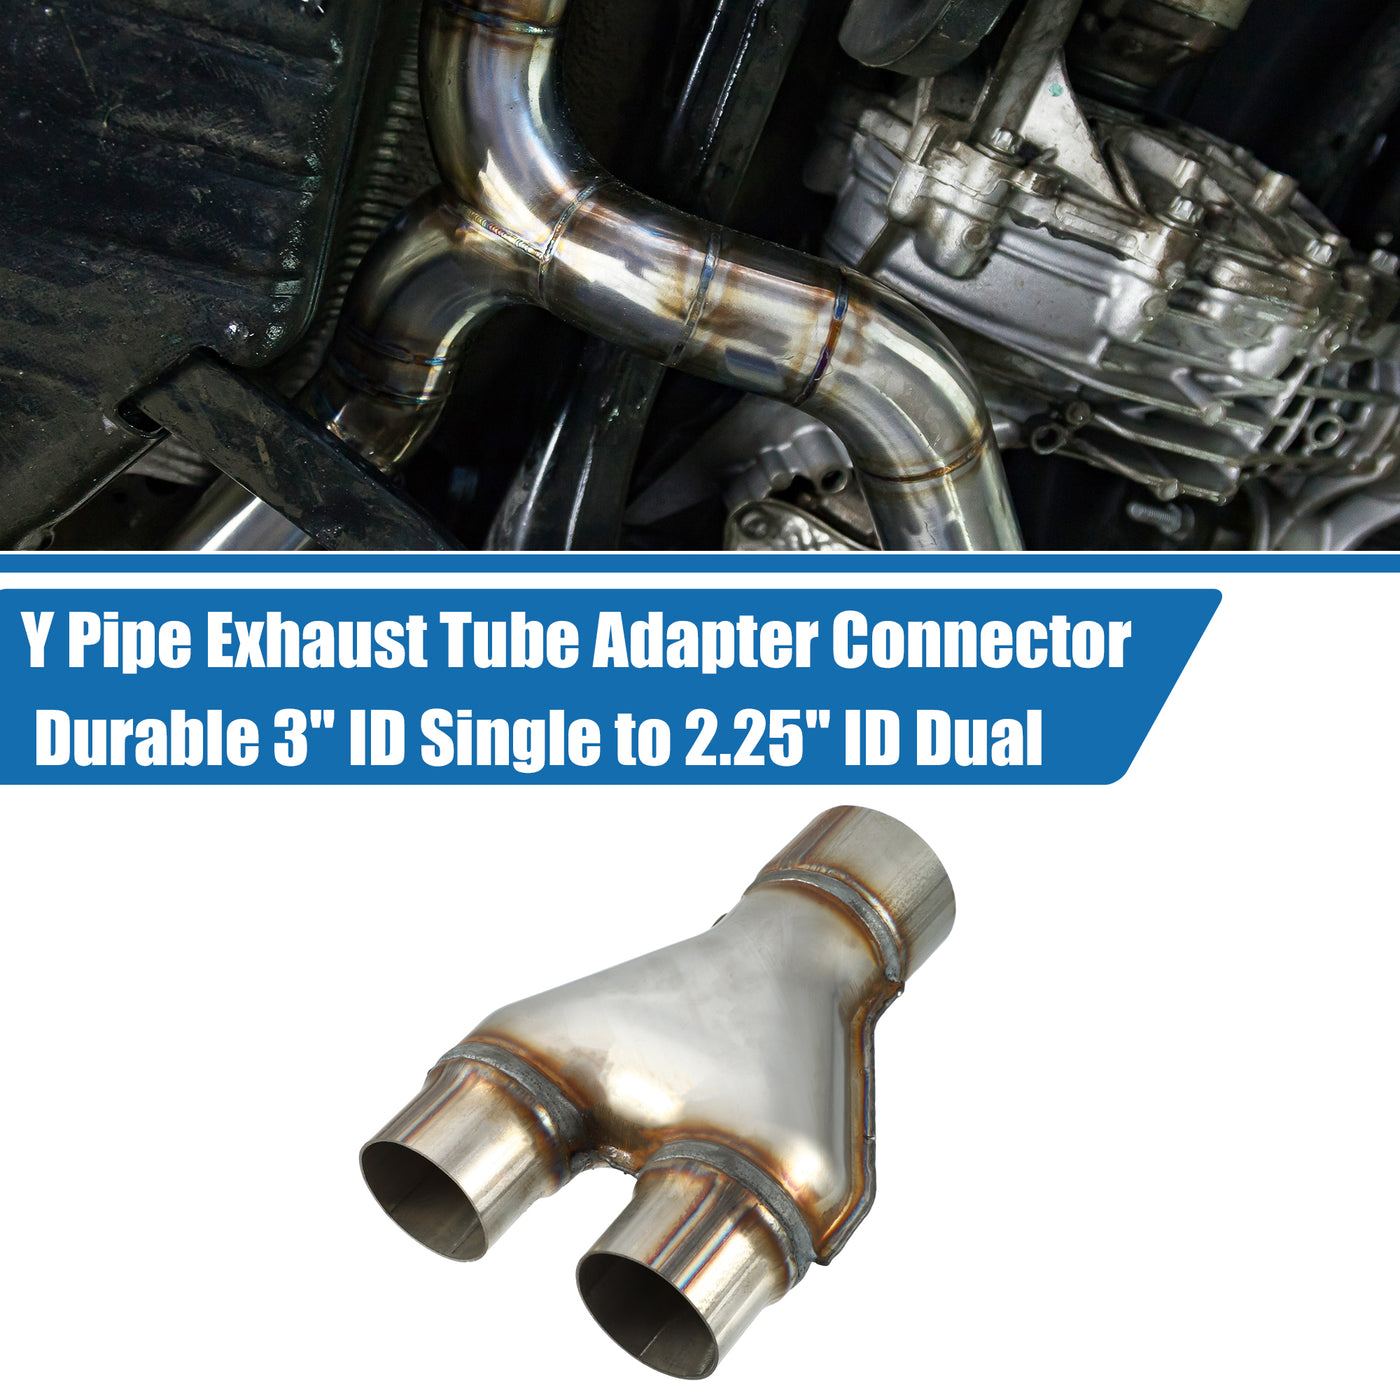 A ABSOPRO Y Pipe Exhaust Tube Adapter Connector Durable 3" ID Single to 2.25" ID Dual Exhaust Adapter Connector 10 Inch Overall Length T409 Stainless Steel Silver Tone